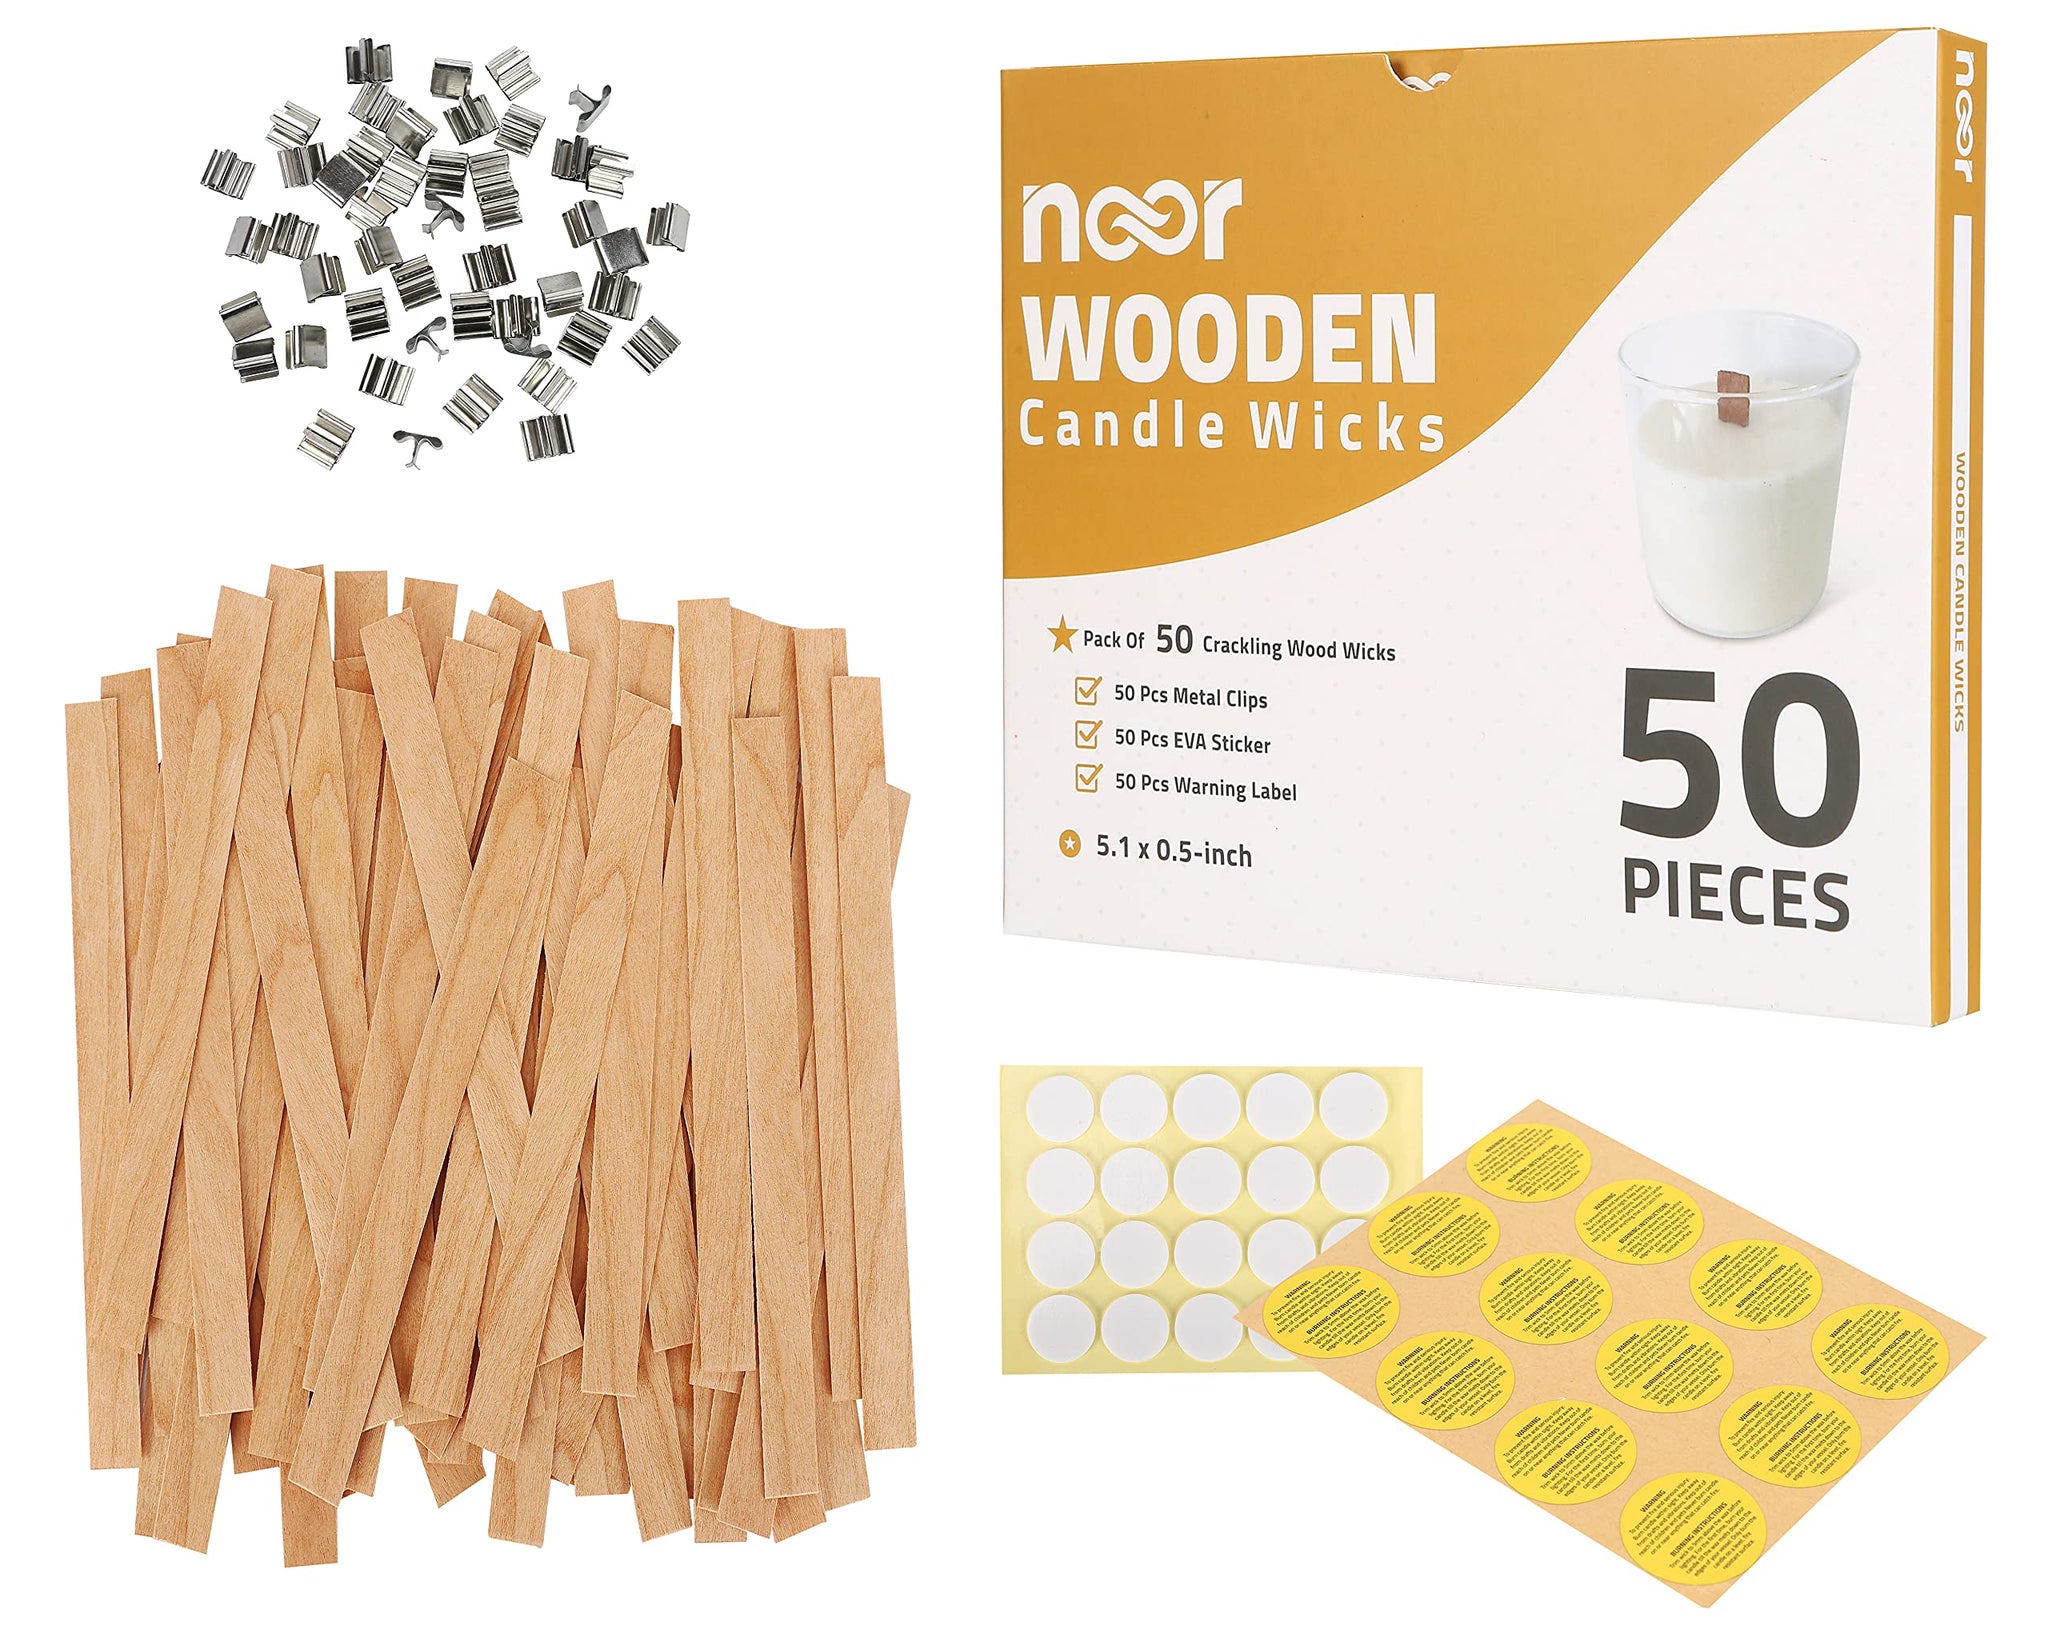  ZYNERY 250 Pcs Wood Candle Wicks Set, 5.9X0.5 Inch Candle Wick  with Metal Base Warning Labels, Natural Wooden Wicks for Candle Making  Supplies, Smokeless Wood Wicks for Soy Wax Candle Cores